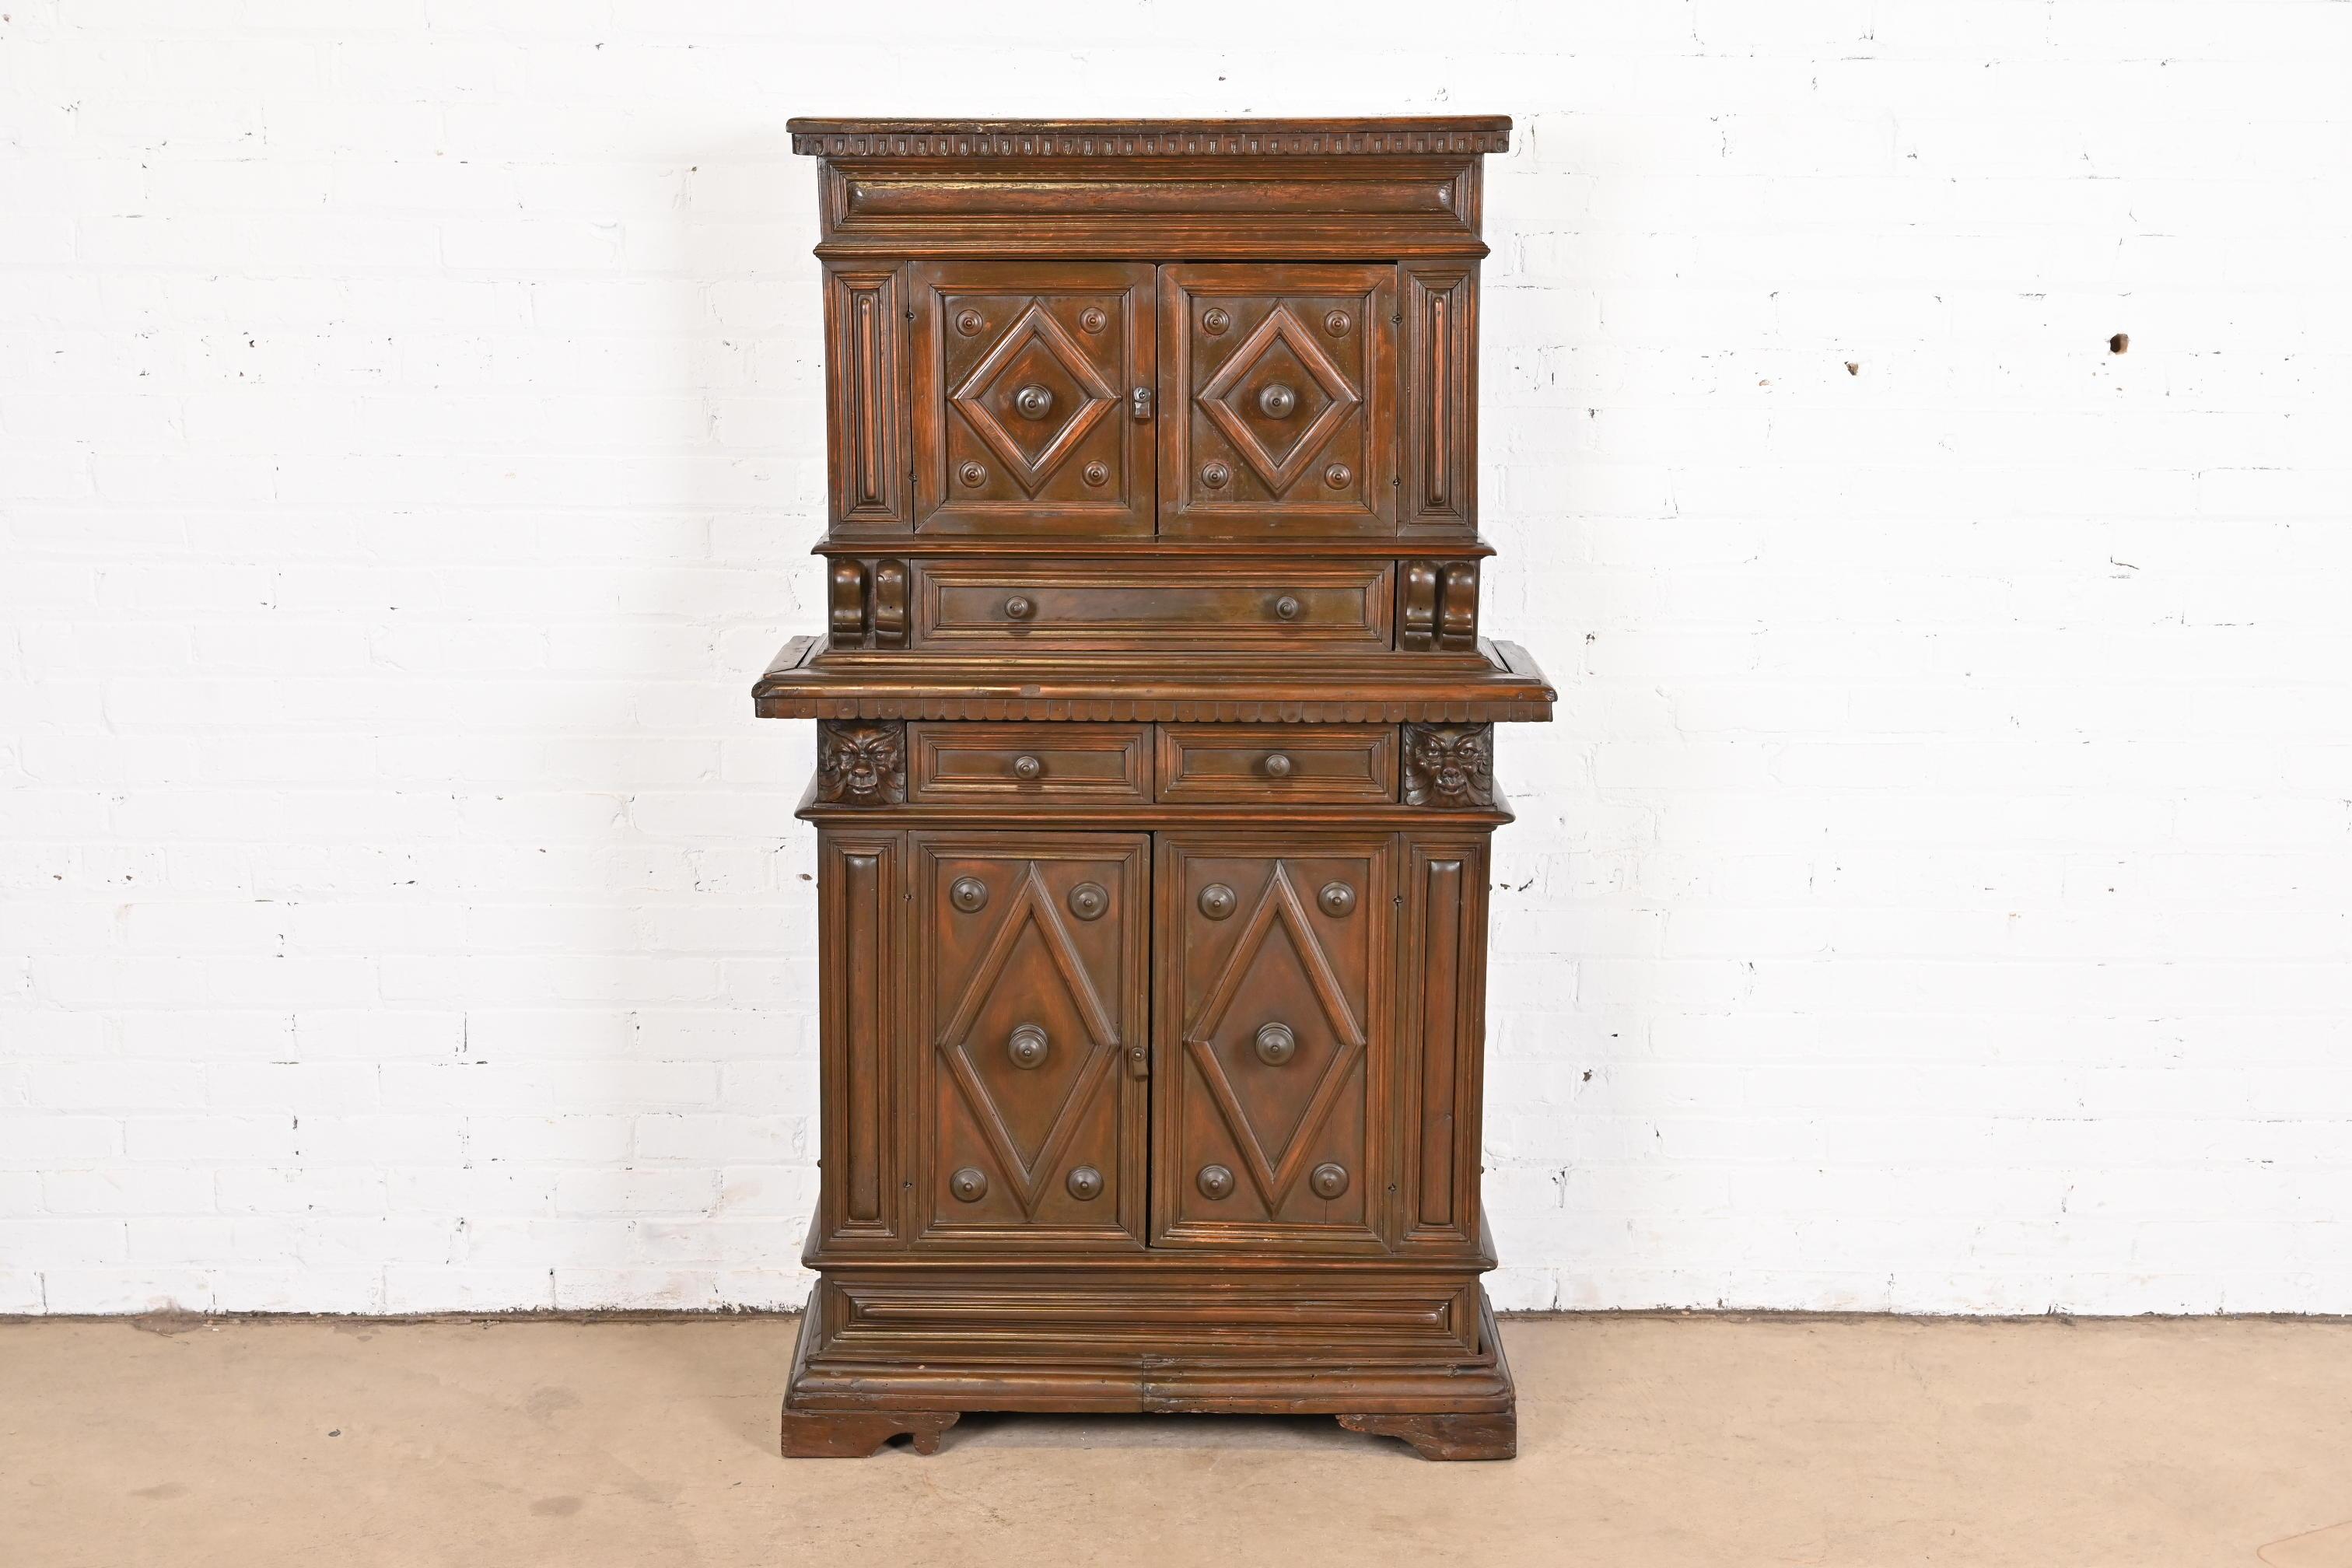 A gorgeous early 19th century Italian Renaissance Revival walnut cupboard or bar cabinet with carved faces of mythological creatures

Italy, circa 1800

Measures: 35